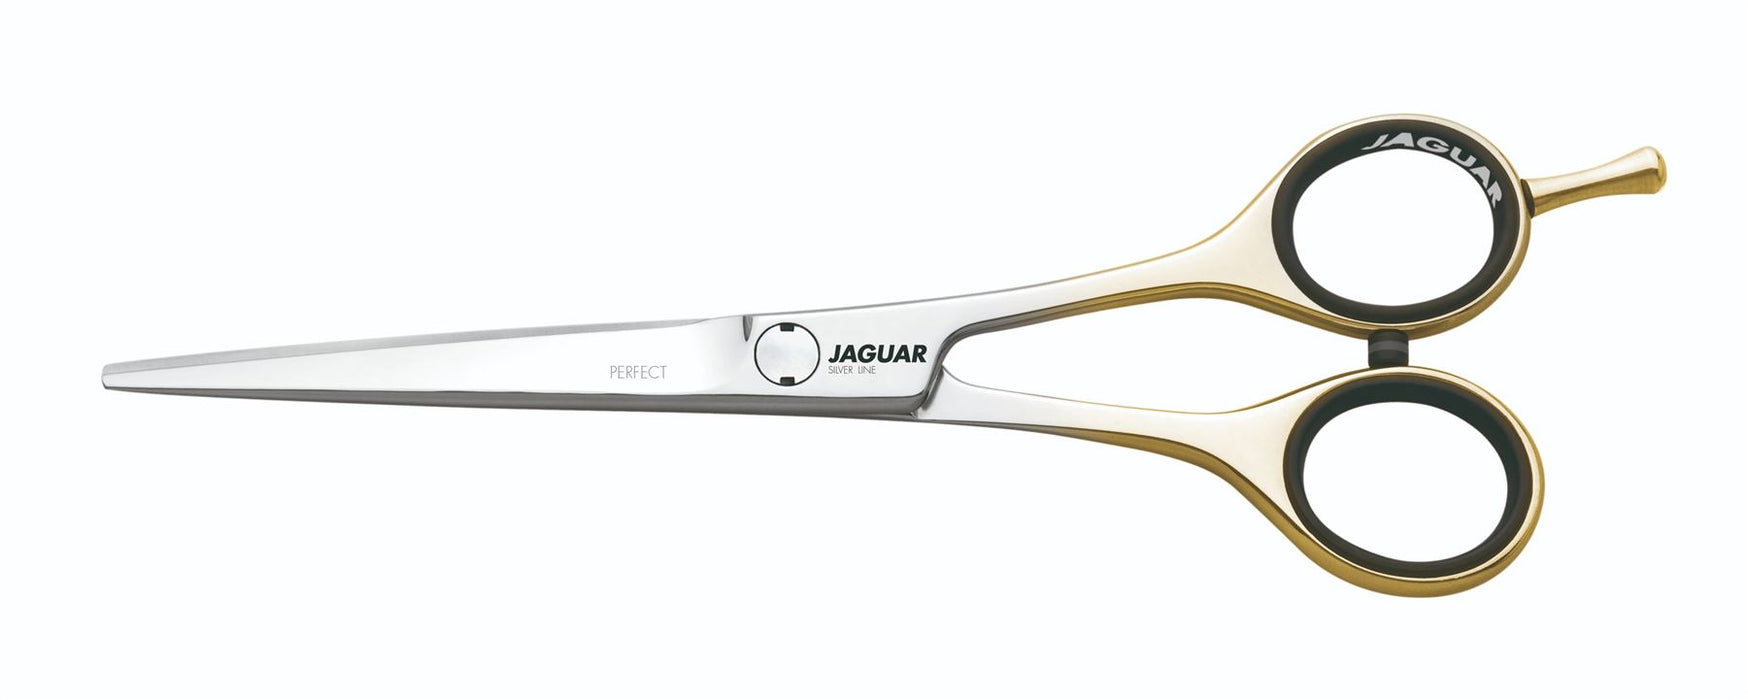 Jaguar Perfect Classic Haircutting Scissors Stainless Steel Polished Finish 5.5"